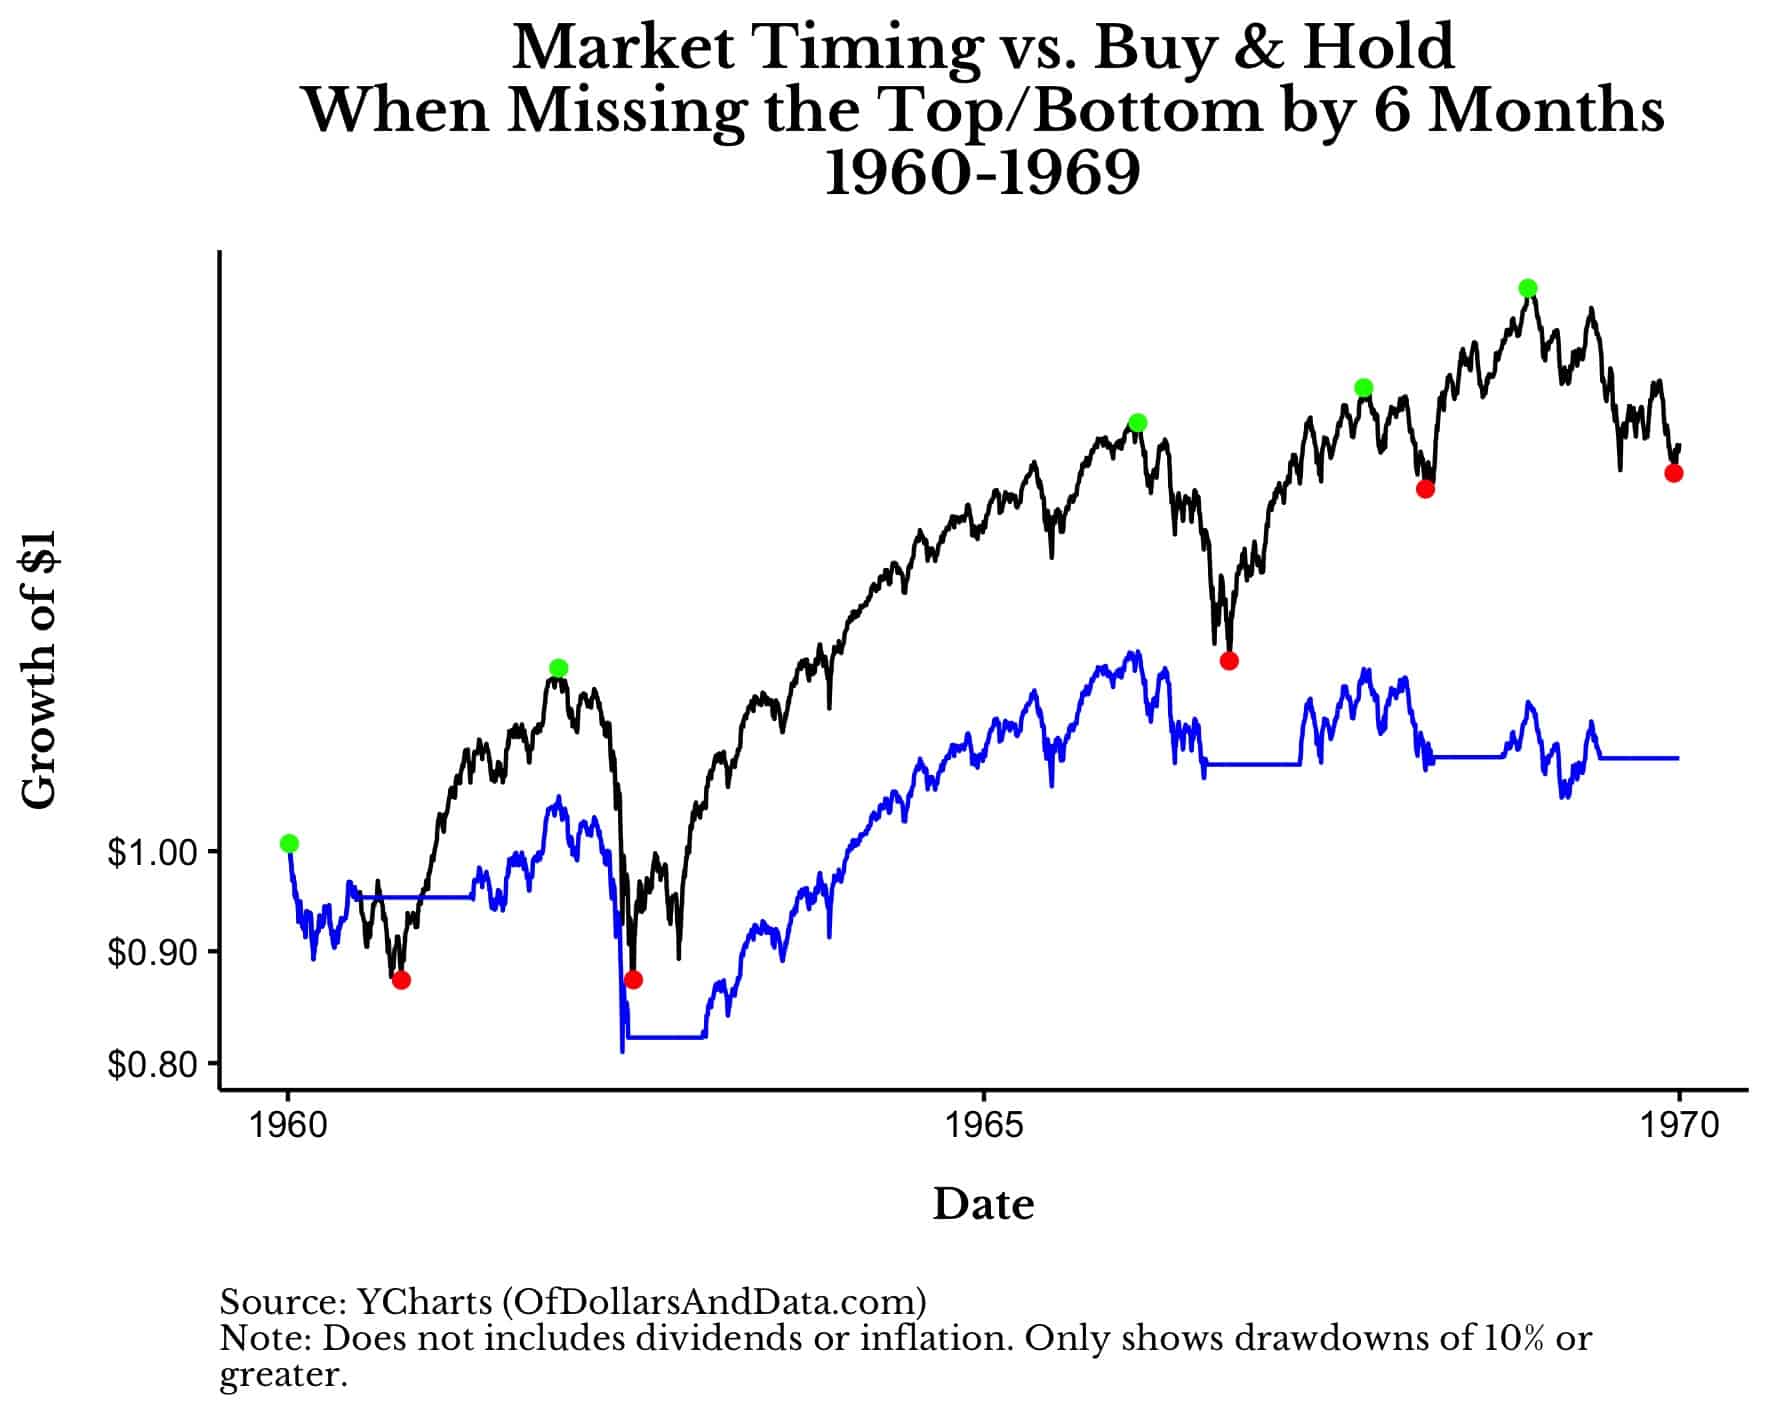 Market timing vs Buy and Hold when missing the top/bottom by 6 months, 1960-1969